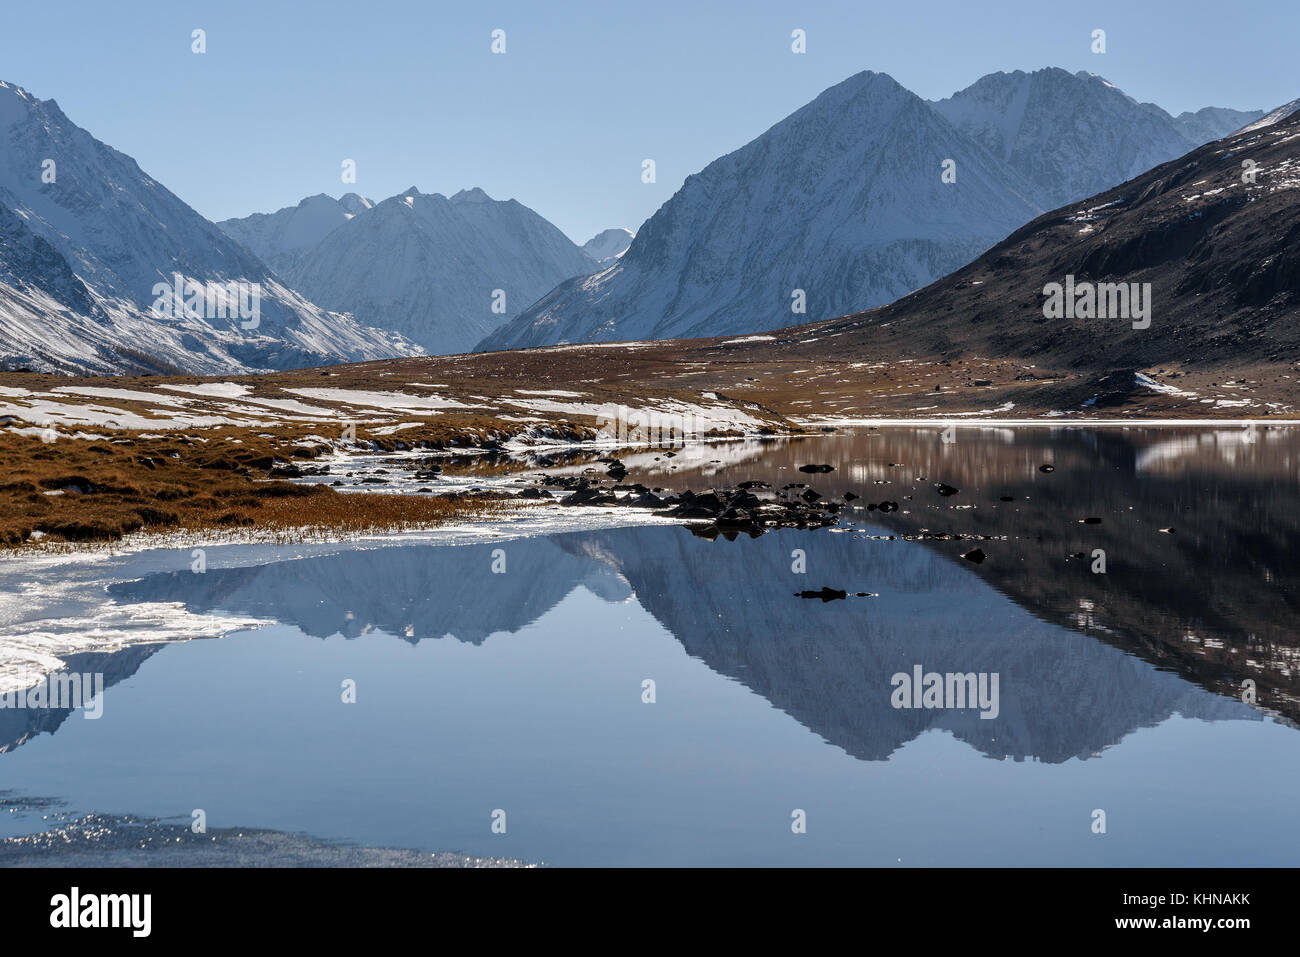 Scenic mountain autumn landscape with a lake, mountains reflecting in the lake, with snow and ice on the shore on a sunny day Stock Photo